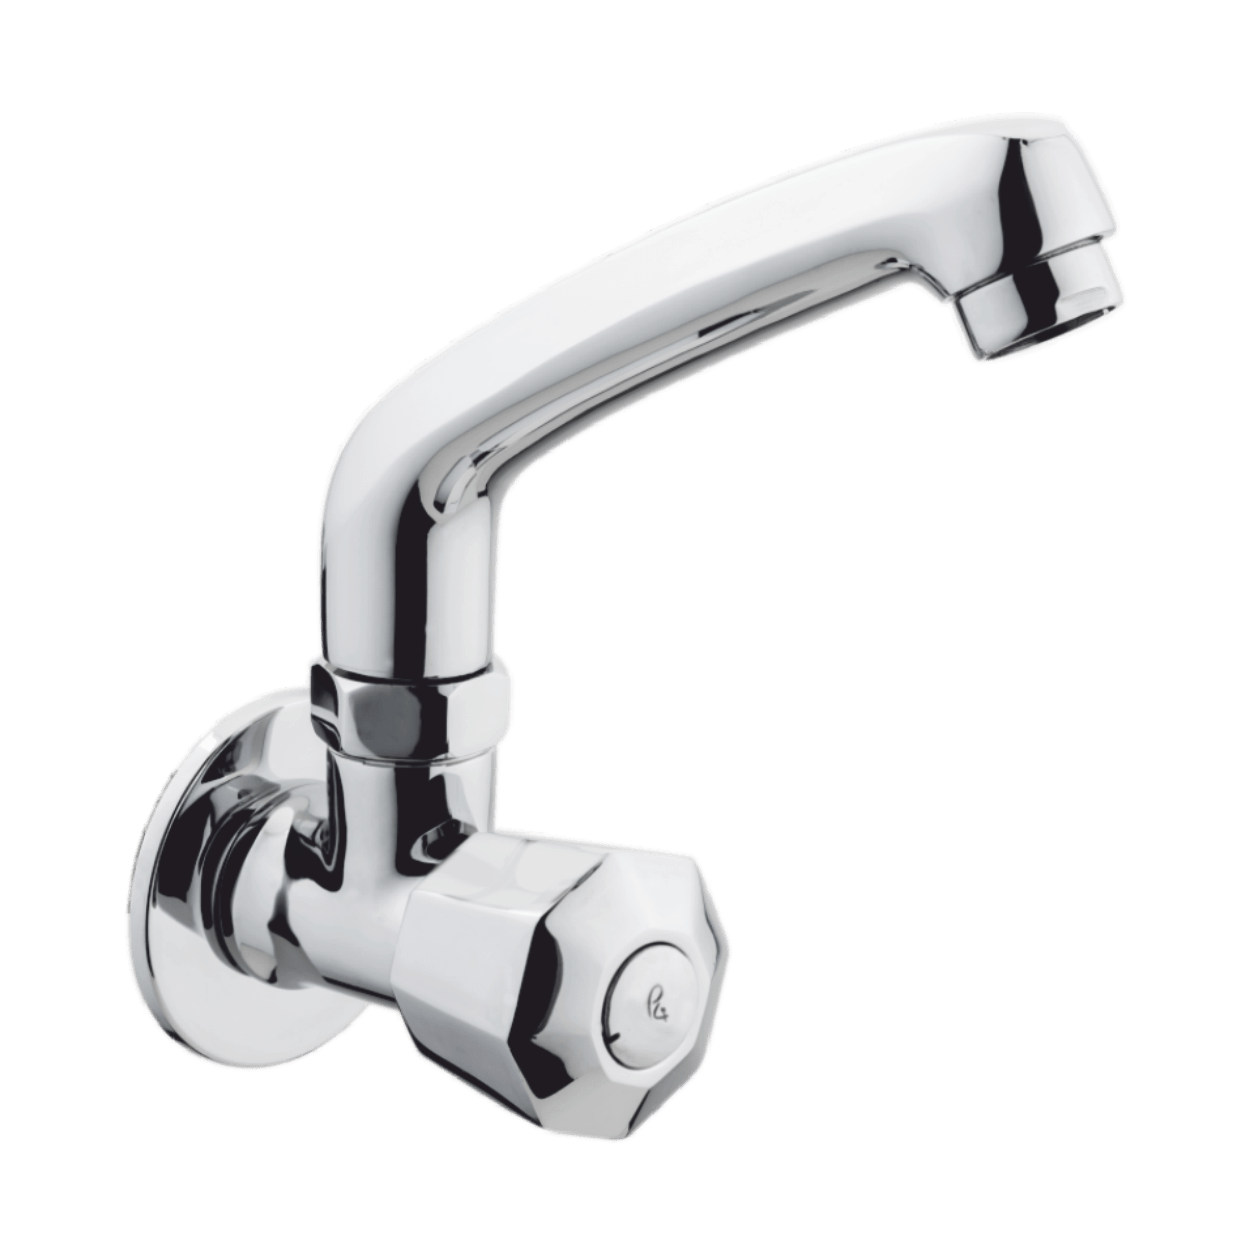 Sink Cock With Swivel Spout - P4 Bathfittings & Accessories